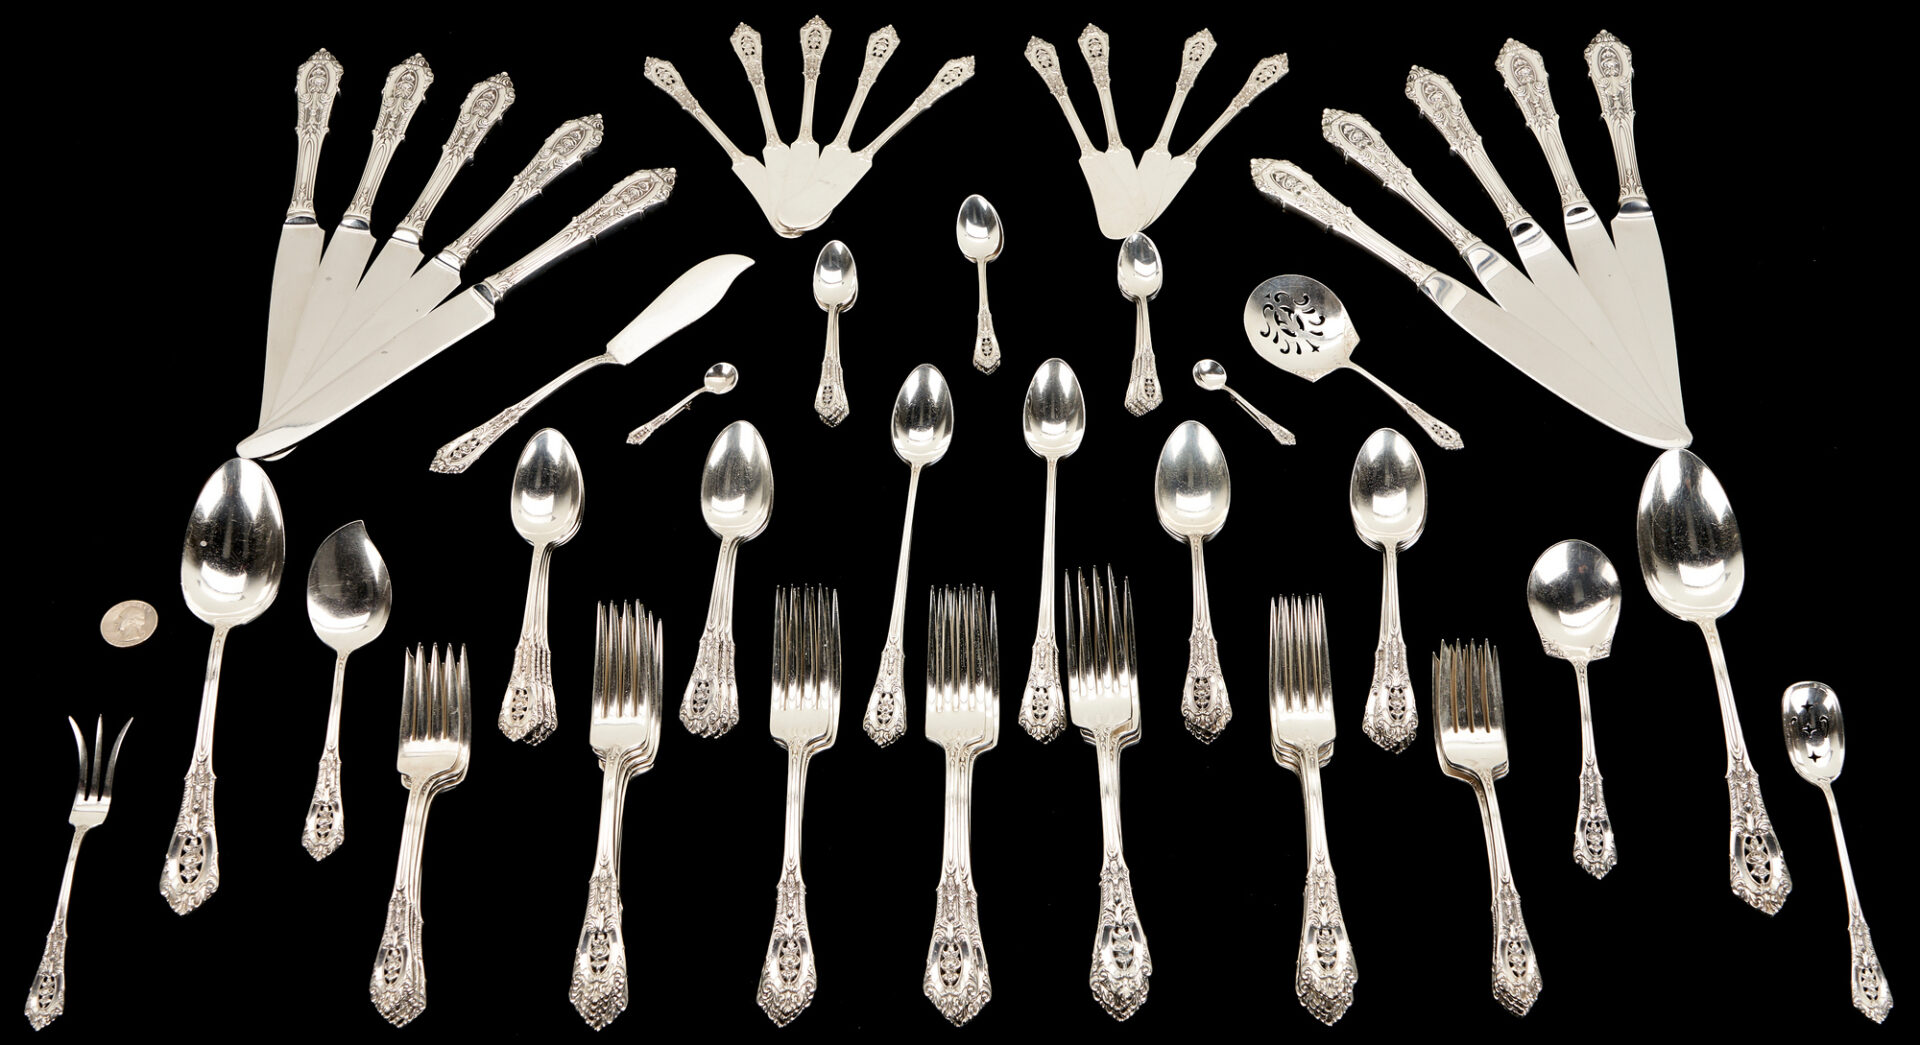 Lot 351: 91 Pcs. Wallace Rosepoint Sterling Silver Flatware, Service for 10